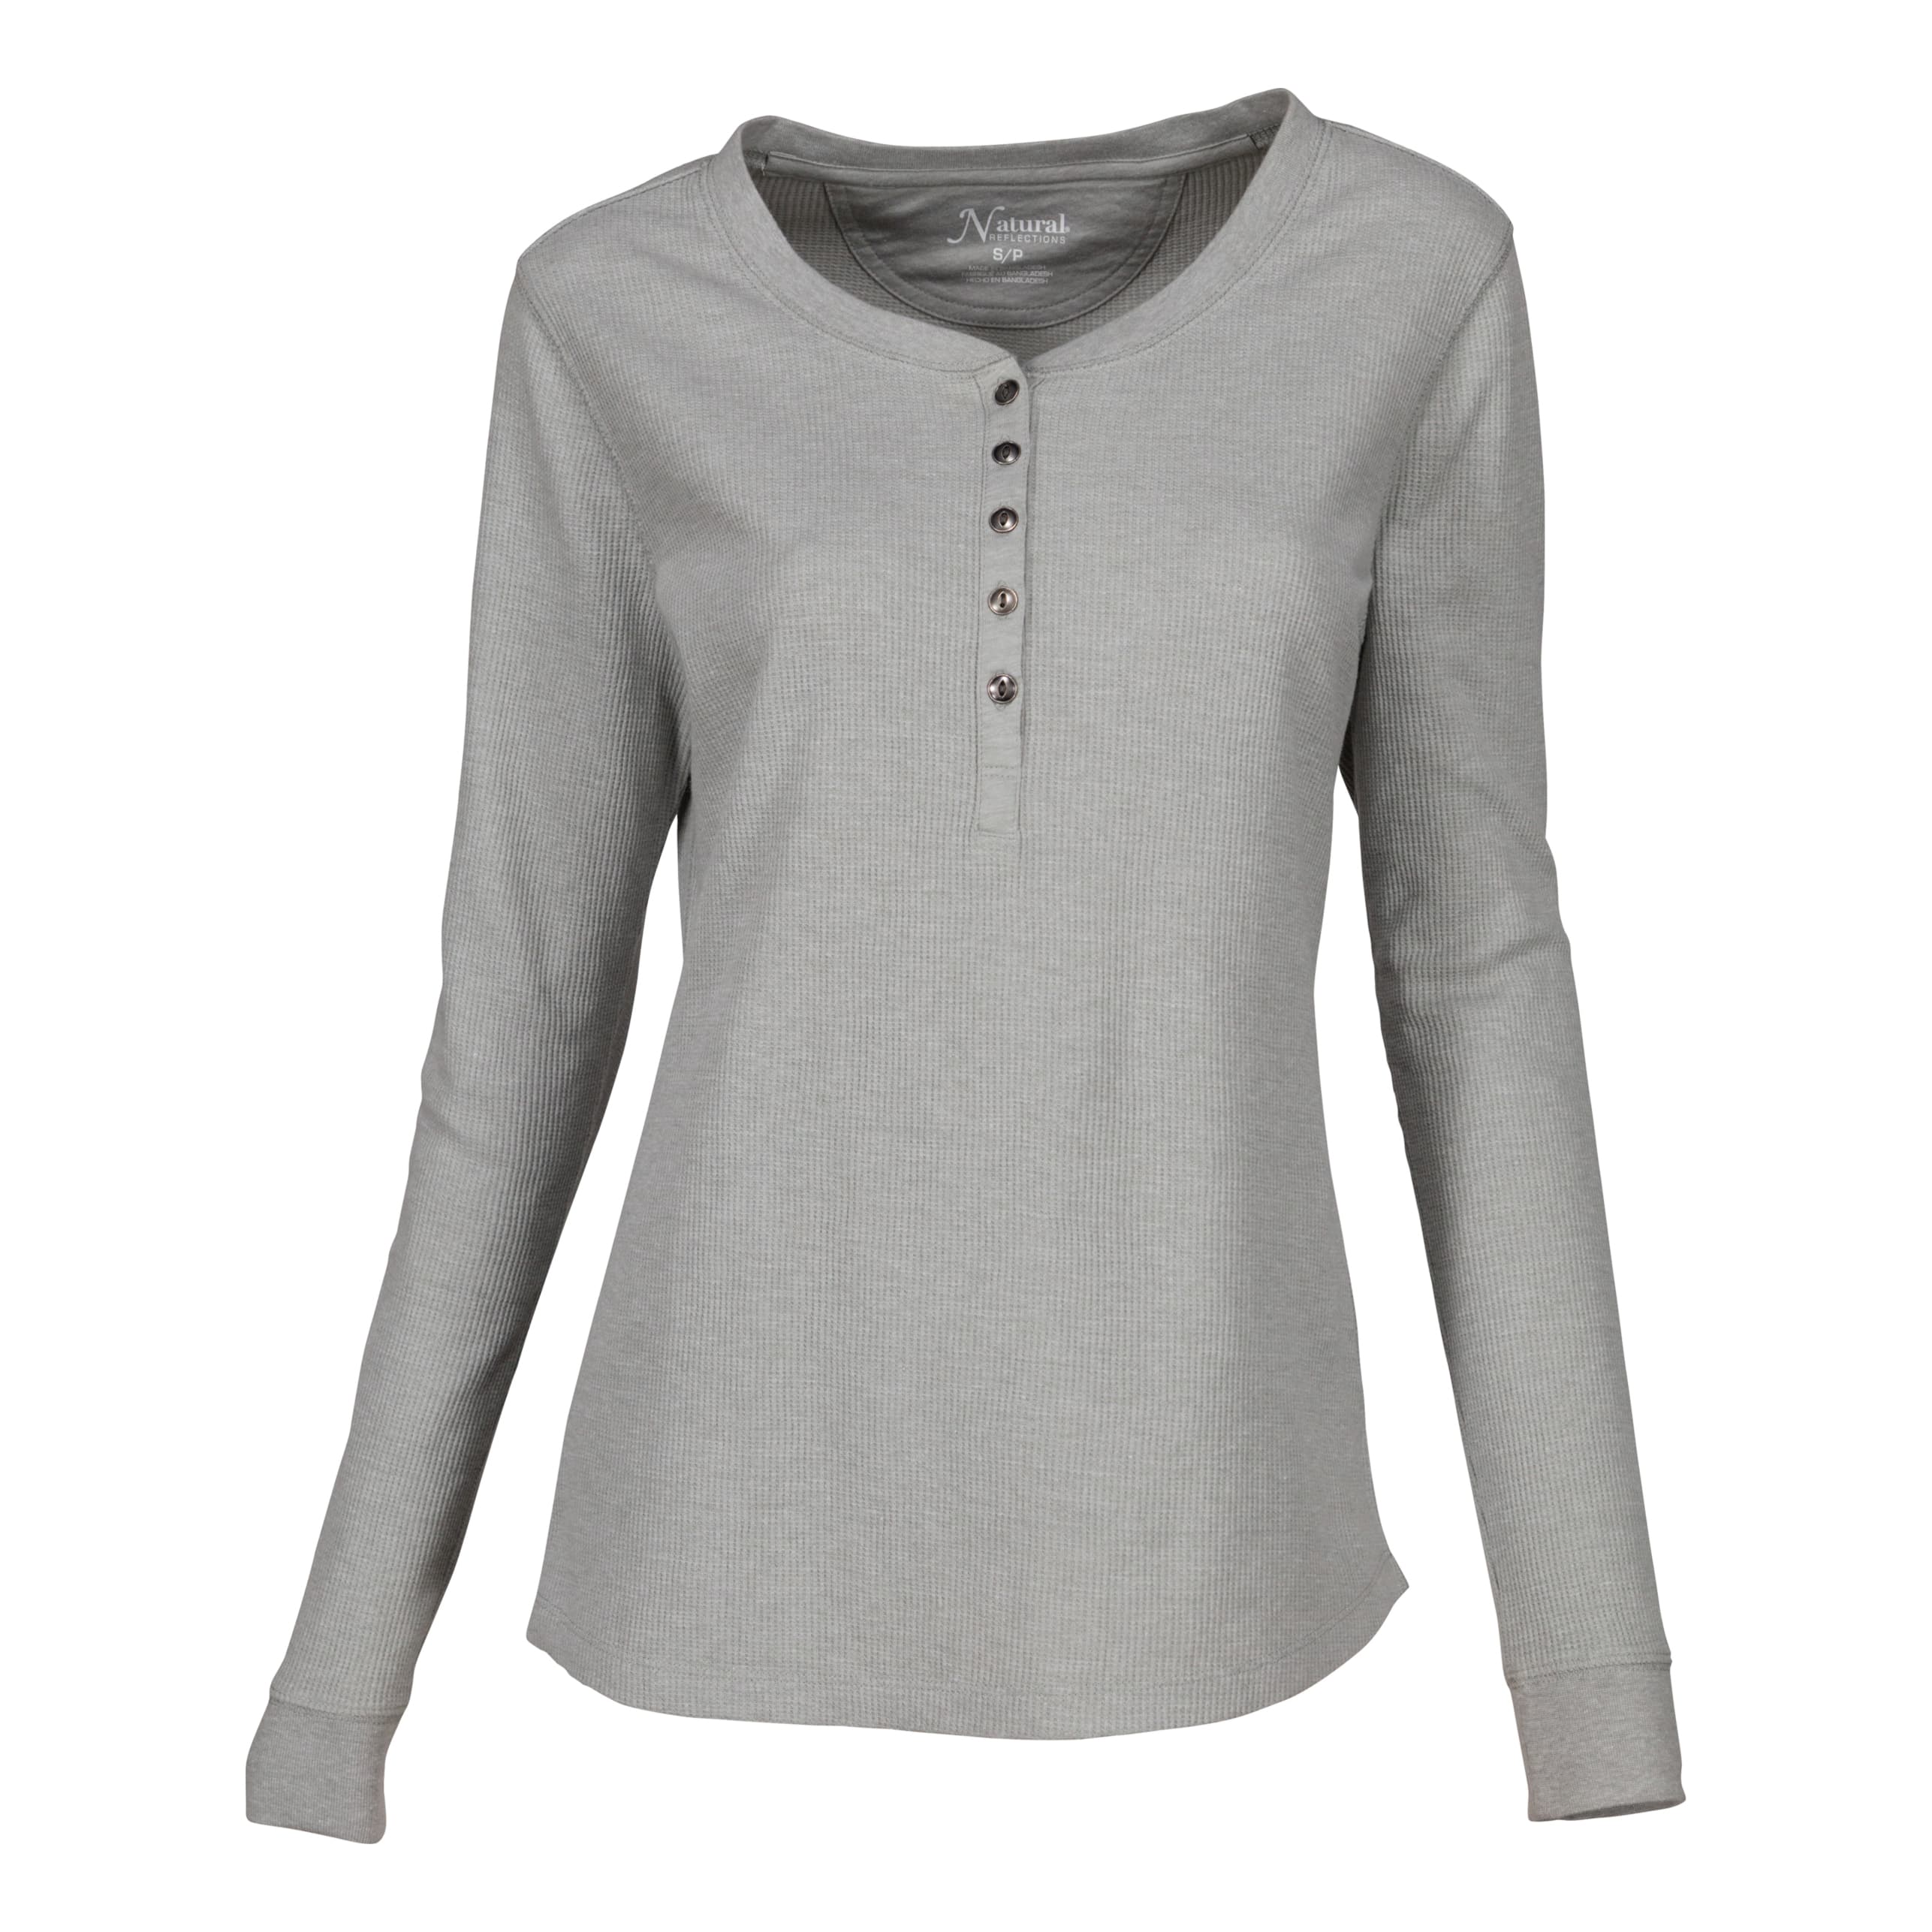 Natural Reflections® Women’s Thermal Henley Shirt - Heather Grey